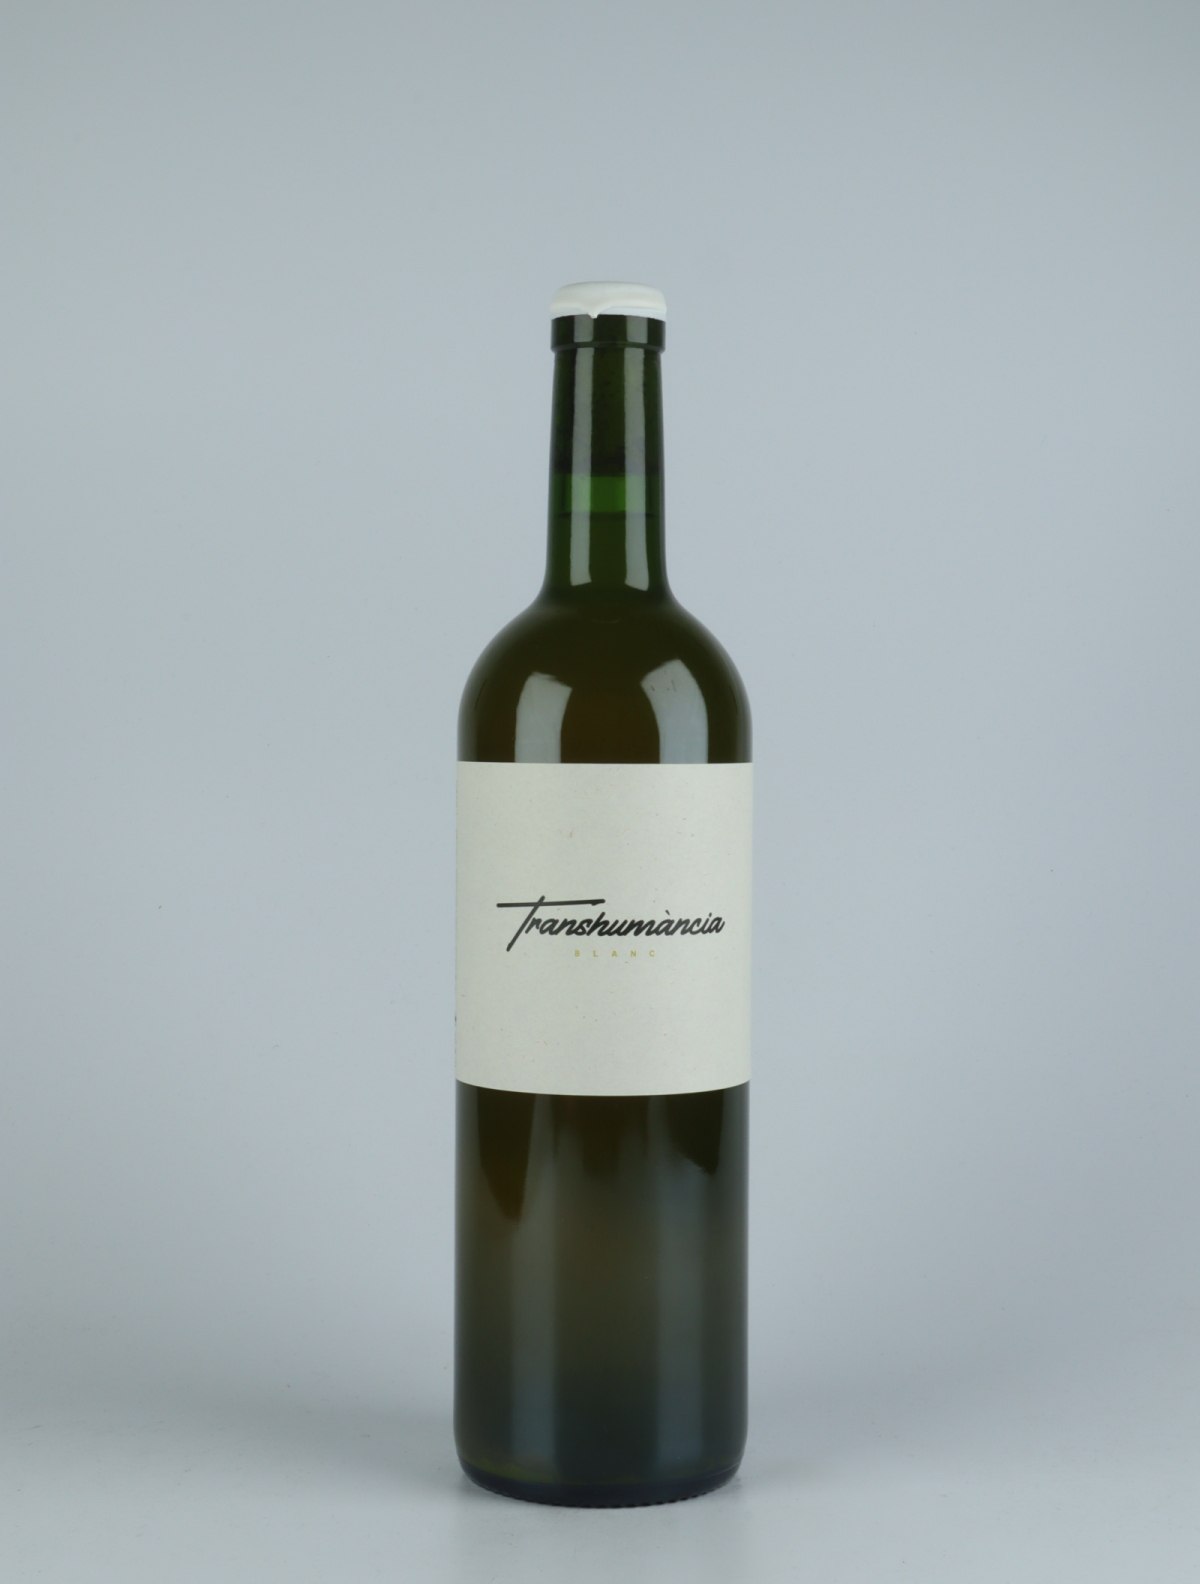 A bottle 2020 Transhumància Blanc Orange wine from Domaine Cotzé, Pyrenees in France